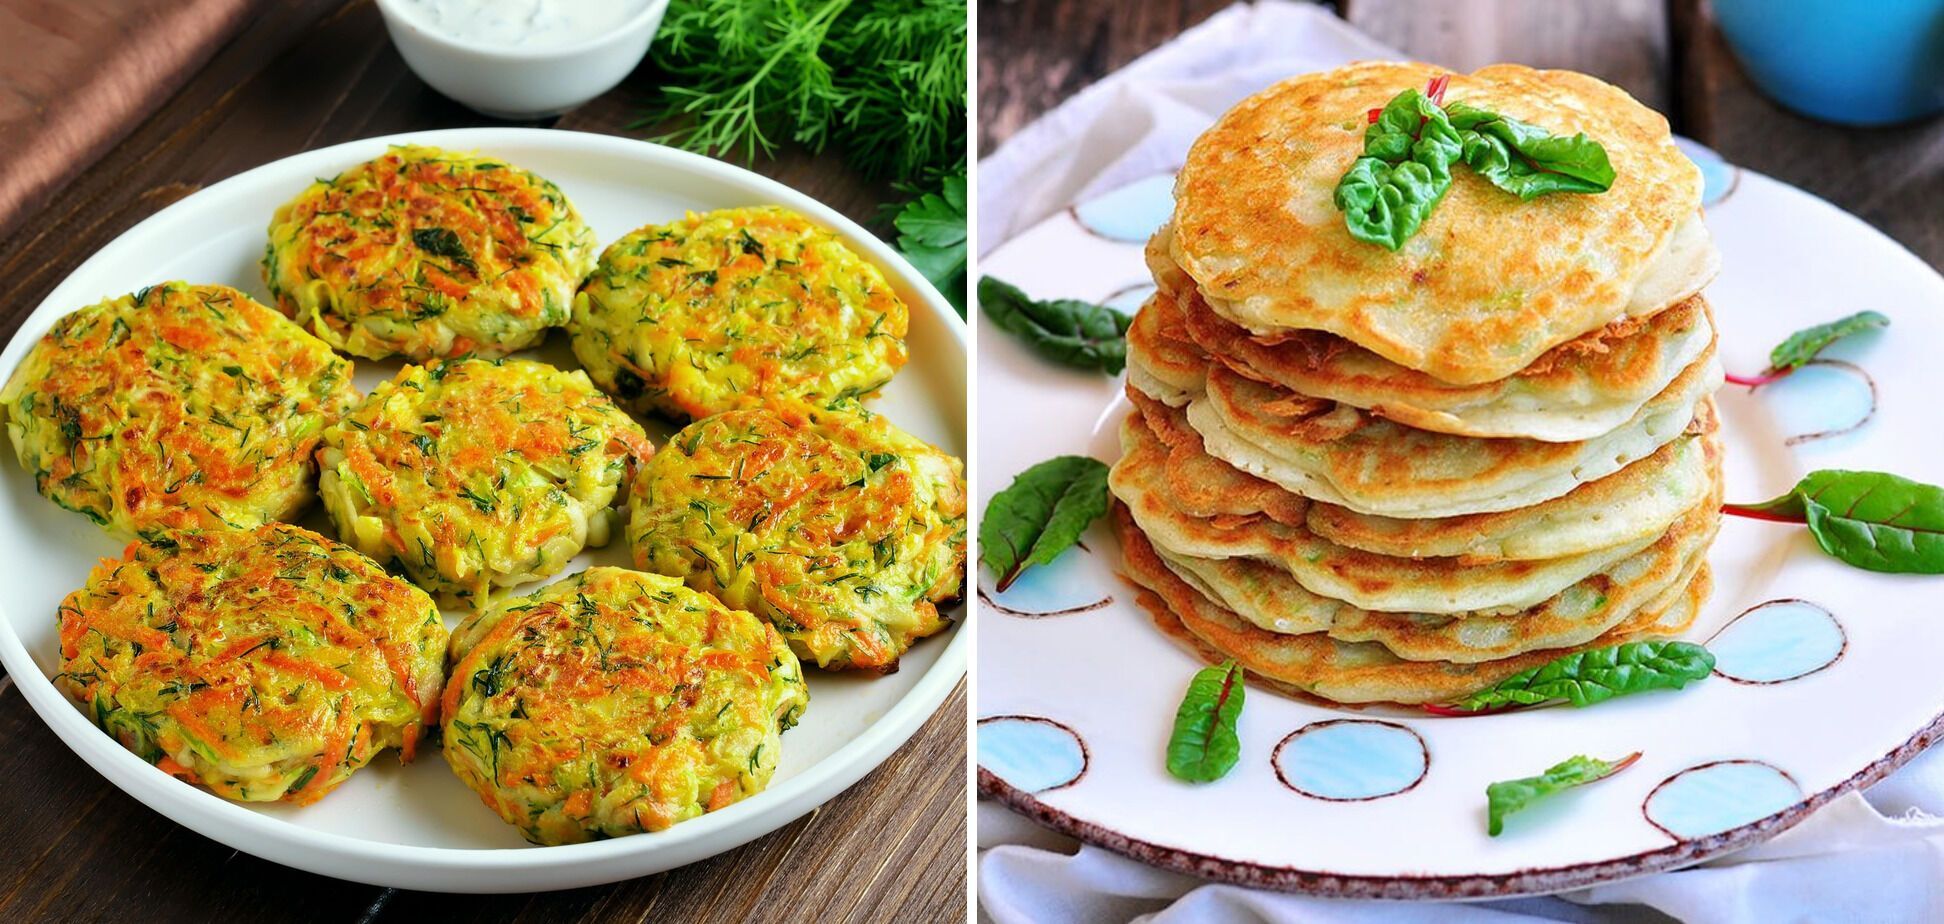 Recipe for cabbage pancakes